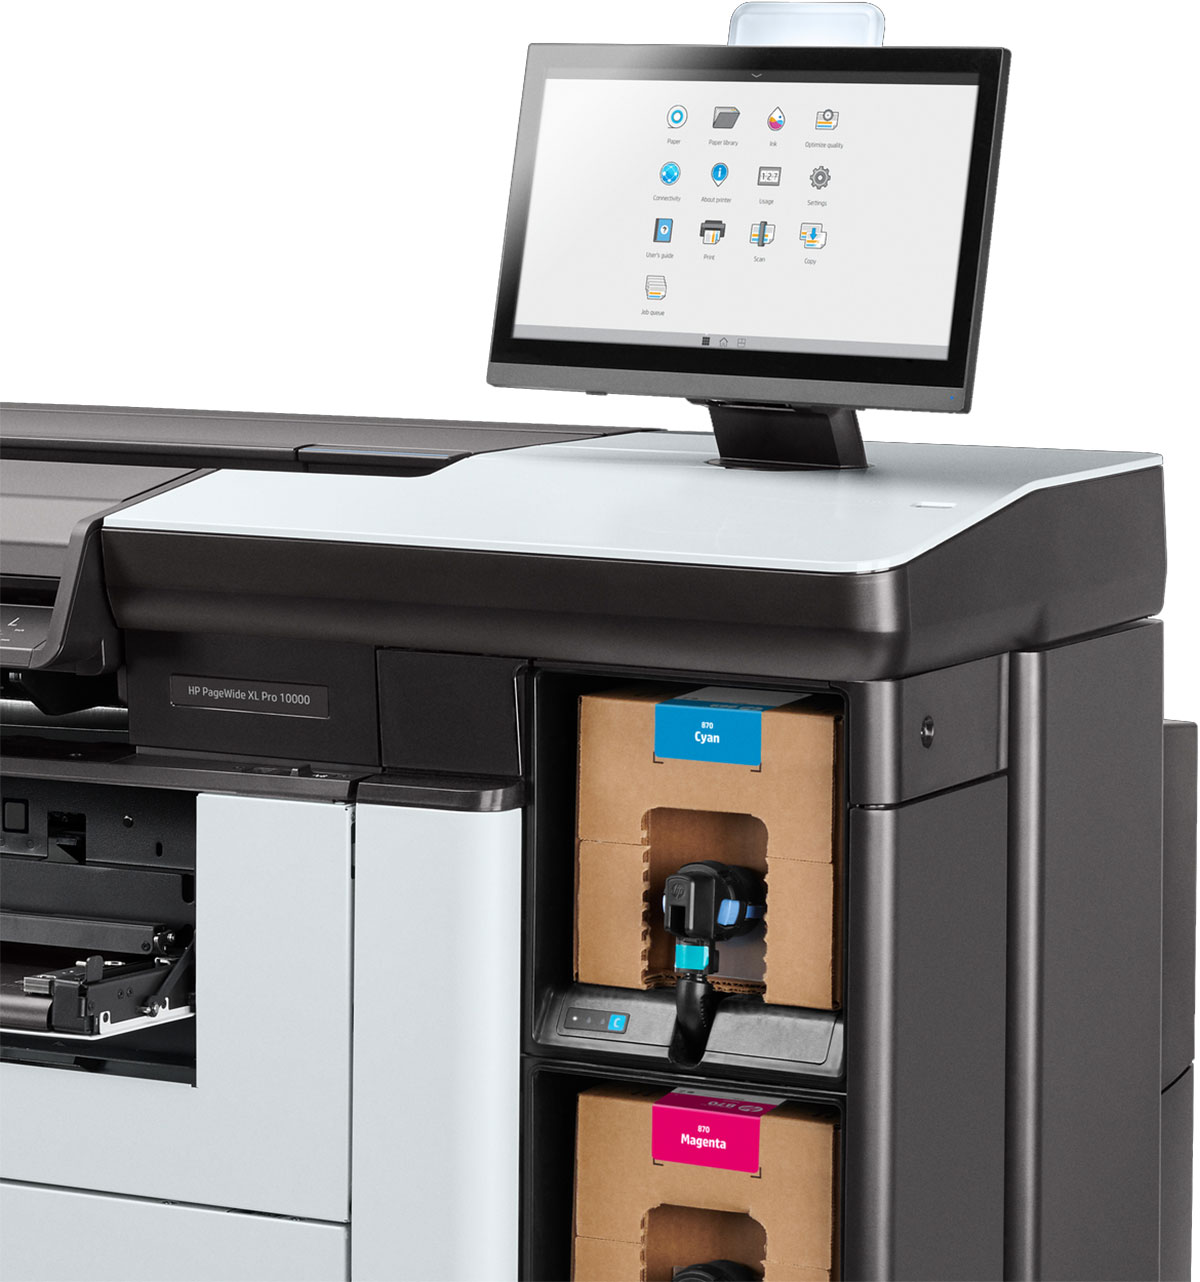 HP PageWide XL Pro 10000